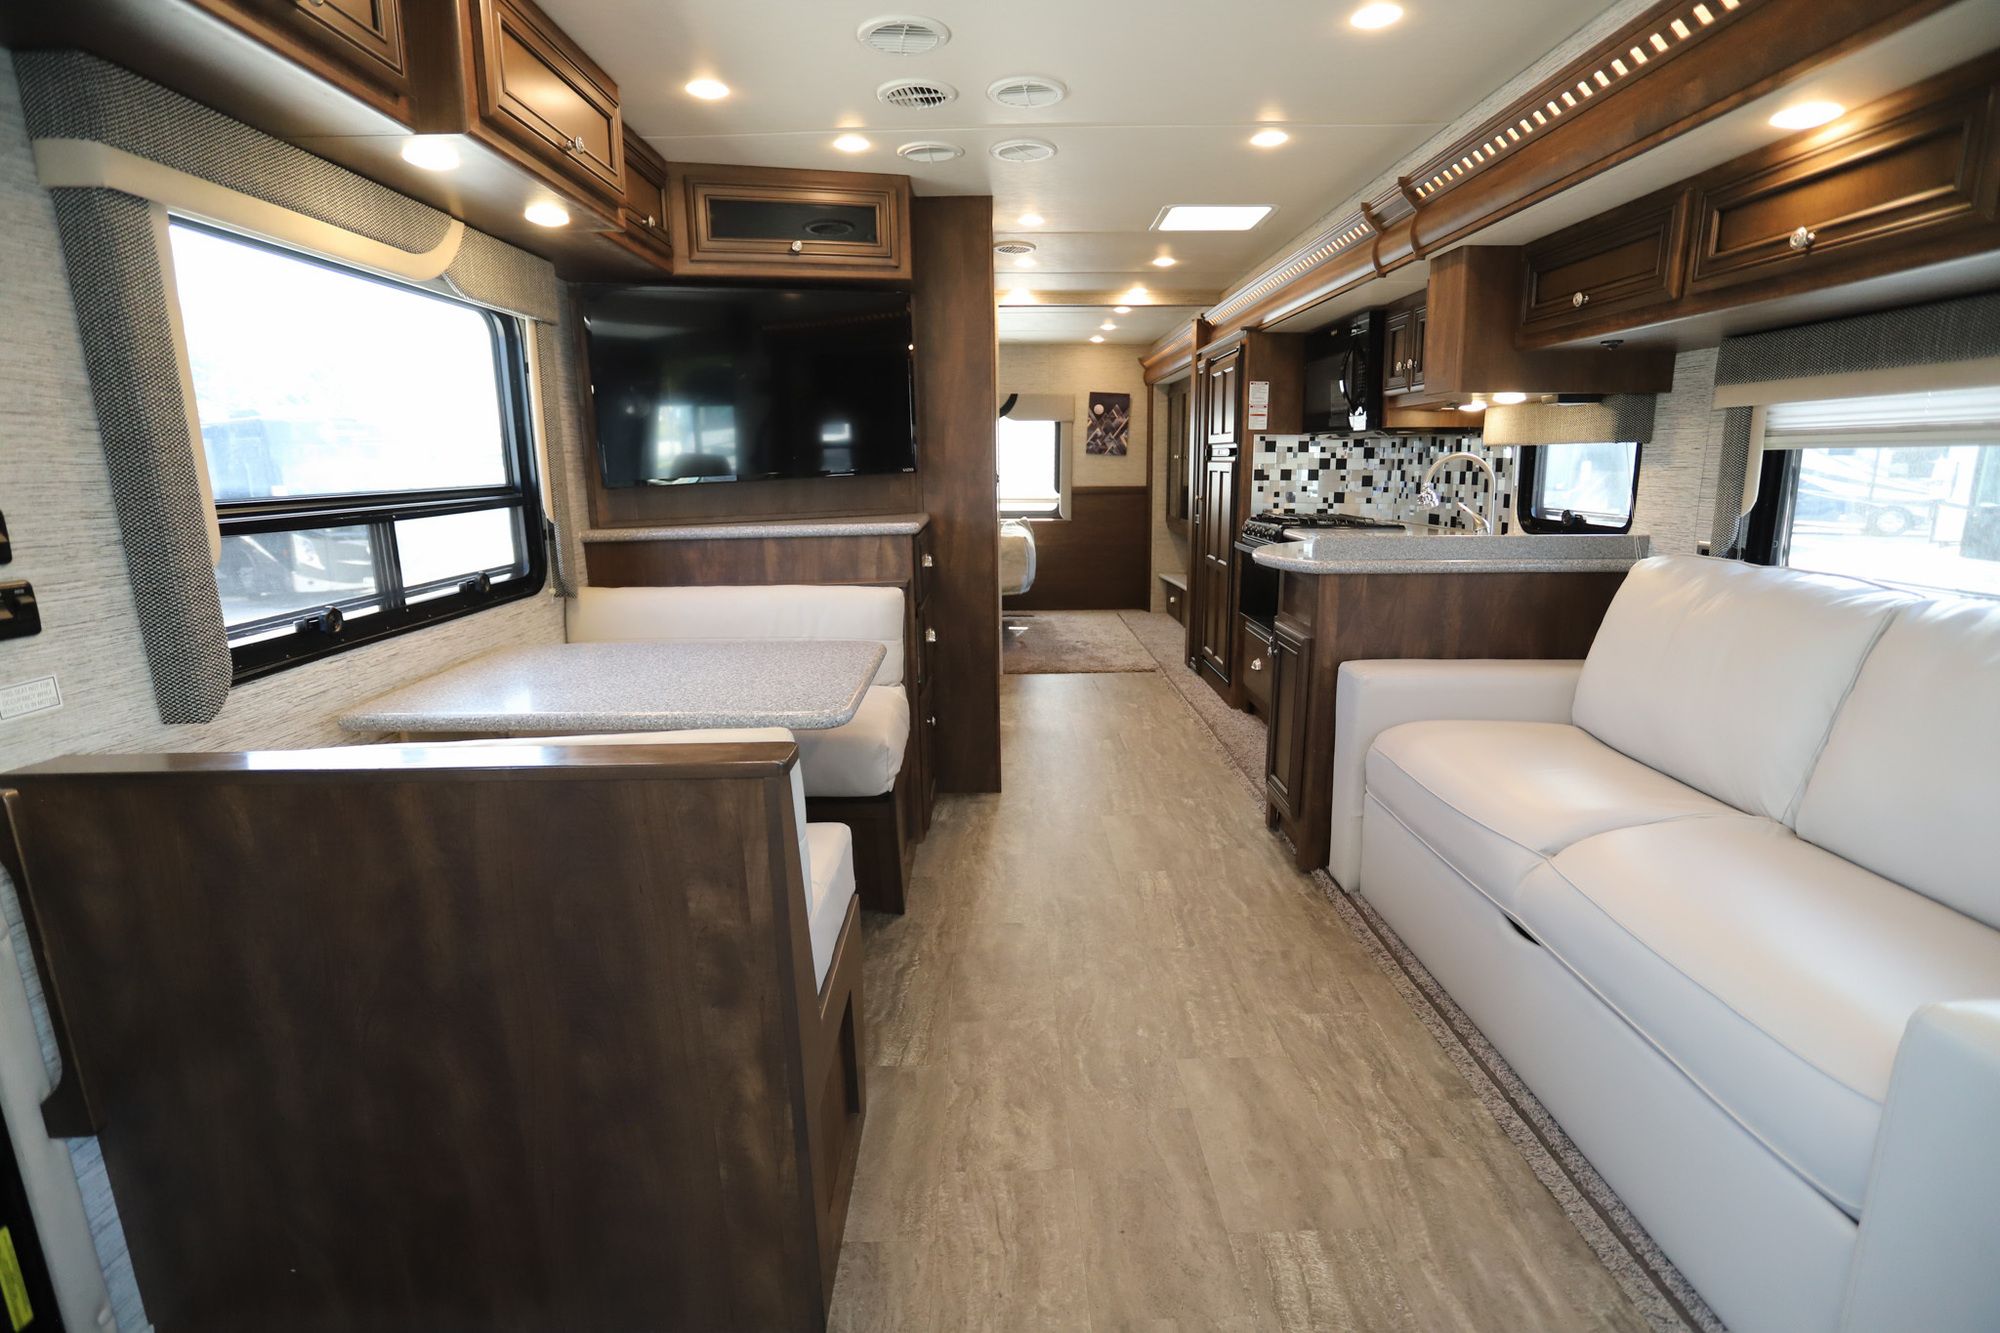 Used 2019 Newmar Bay Star Sport 3014 Class A  For Sale